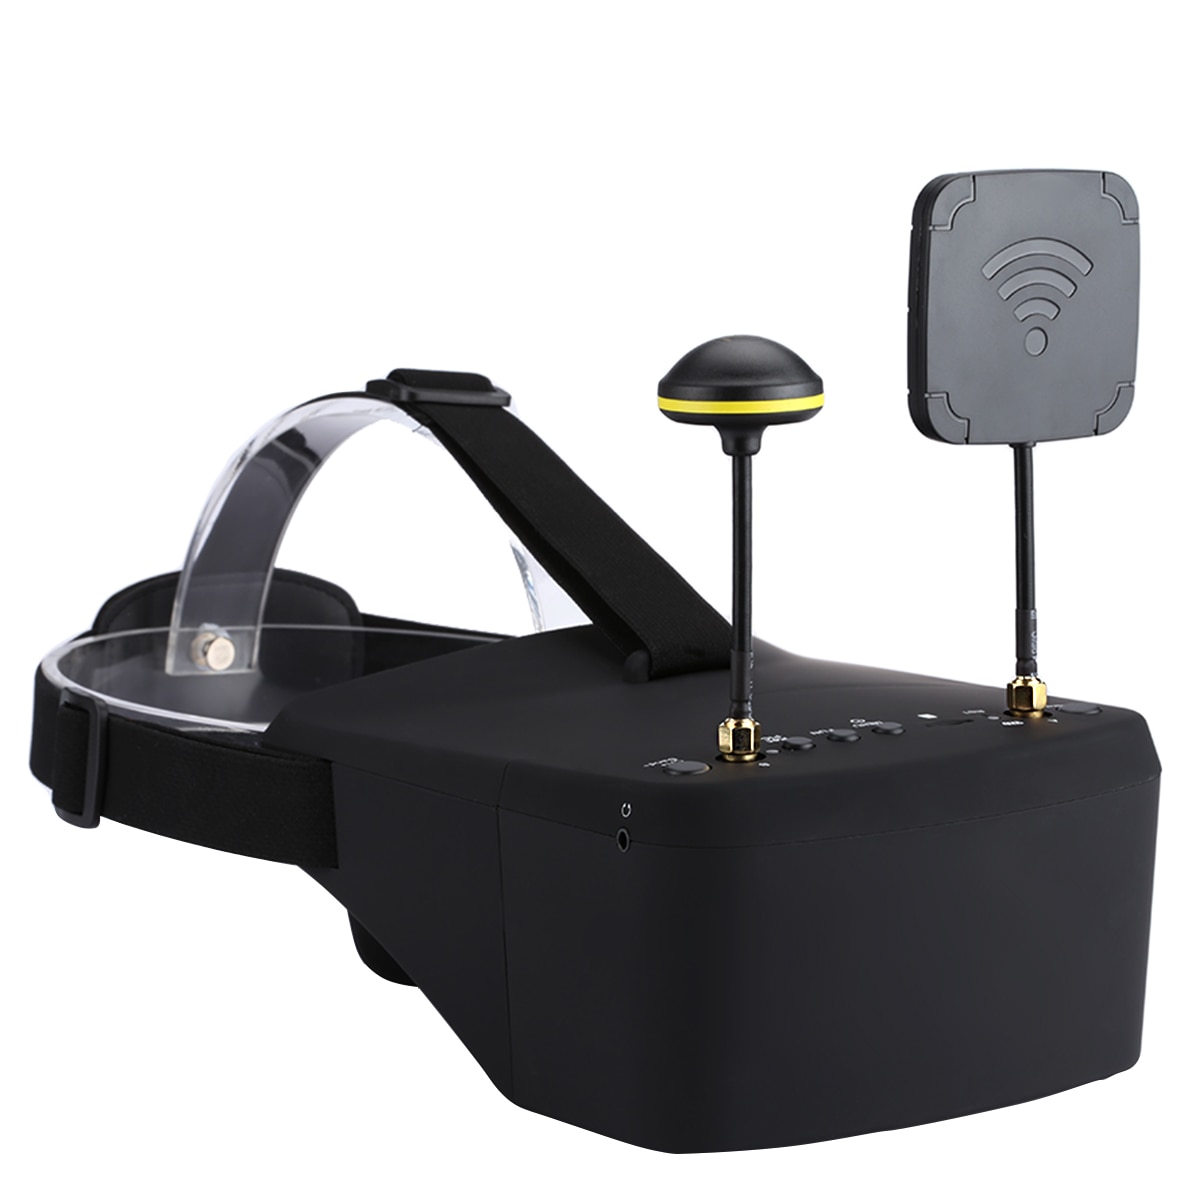 HD FPV Goggles with DVR & Battery